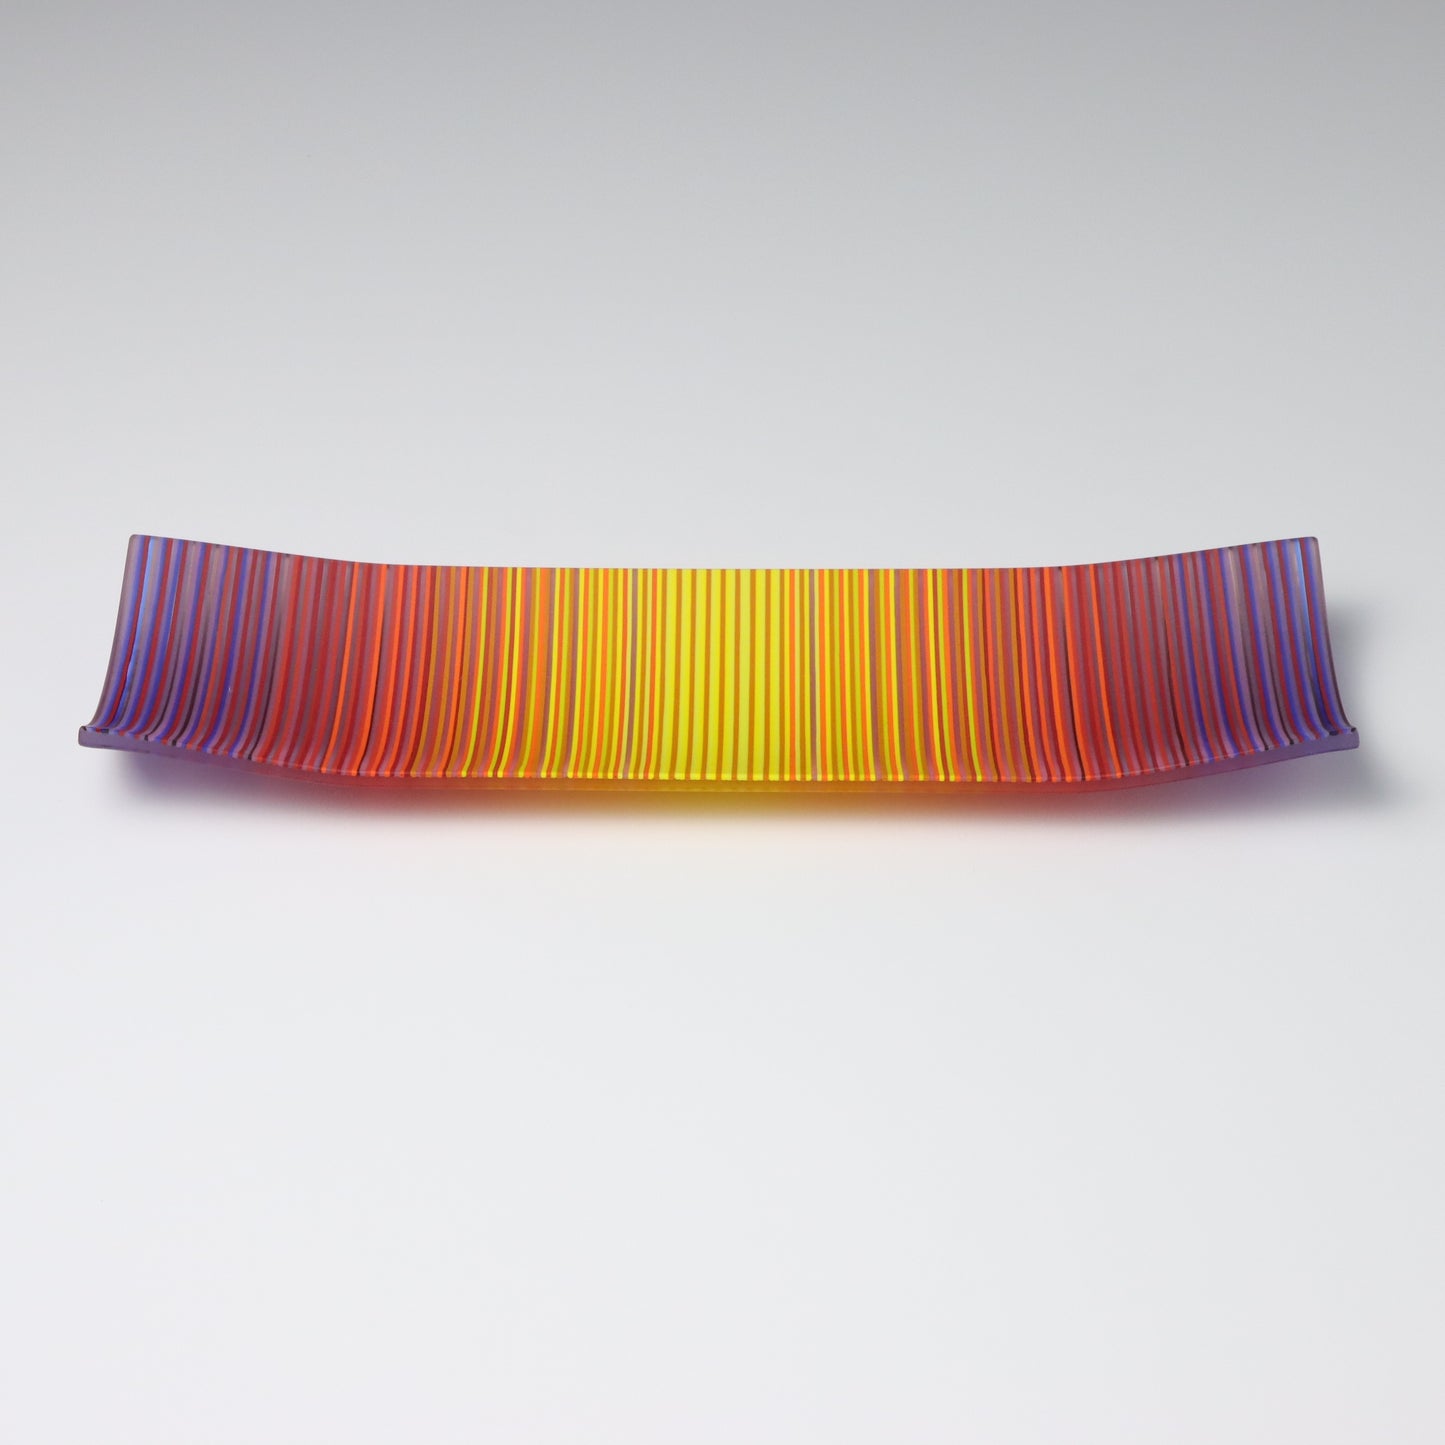 A decorative shallow rectangular boat shaped glass plate with raised corners and a  colourful ColourWave stripe patterns showing key colours of purple, red and yellow.